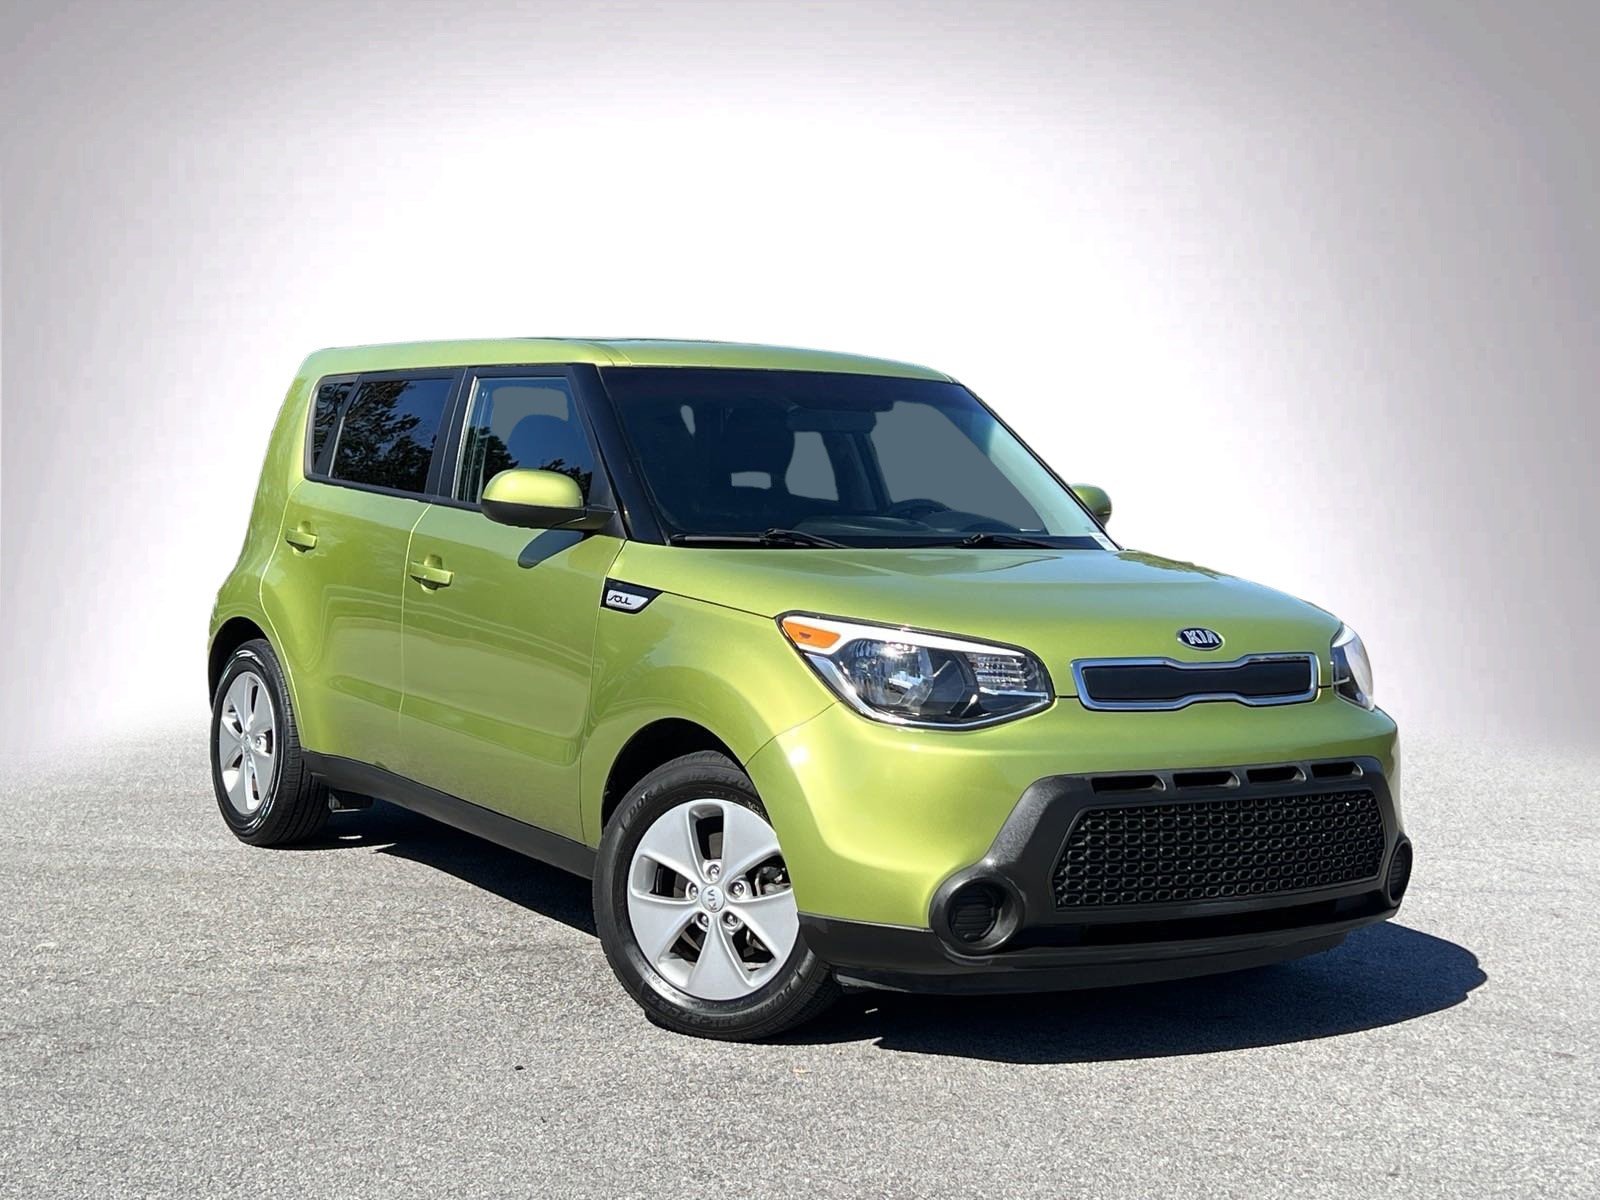 Pre-Owned 2016 Kia Soul Hatchback in Cary #PS53659A | Hendrick Dodge Cary